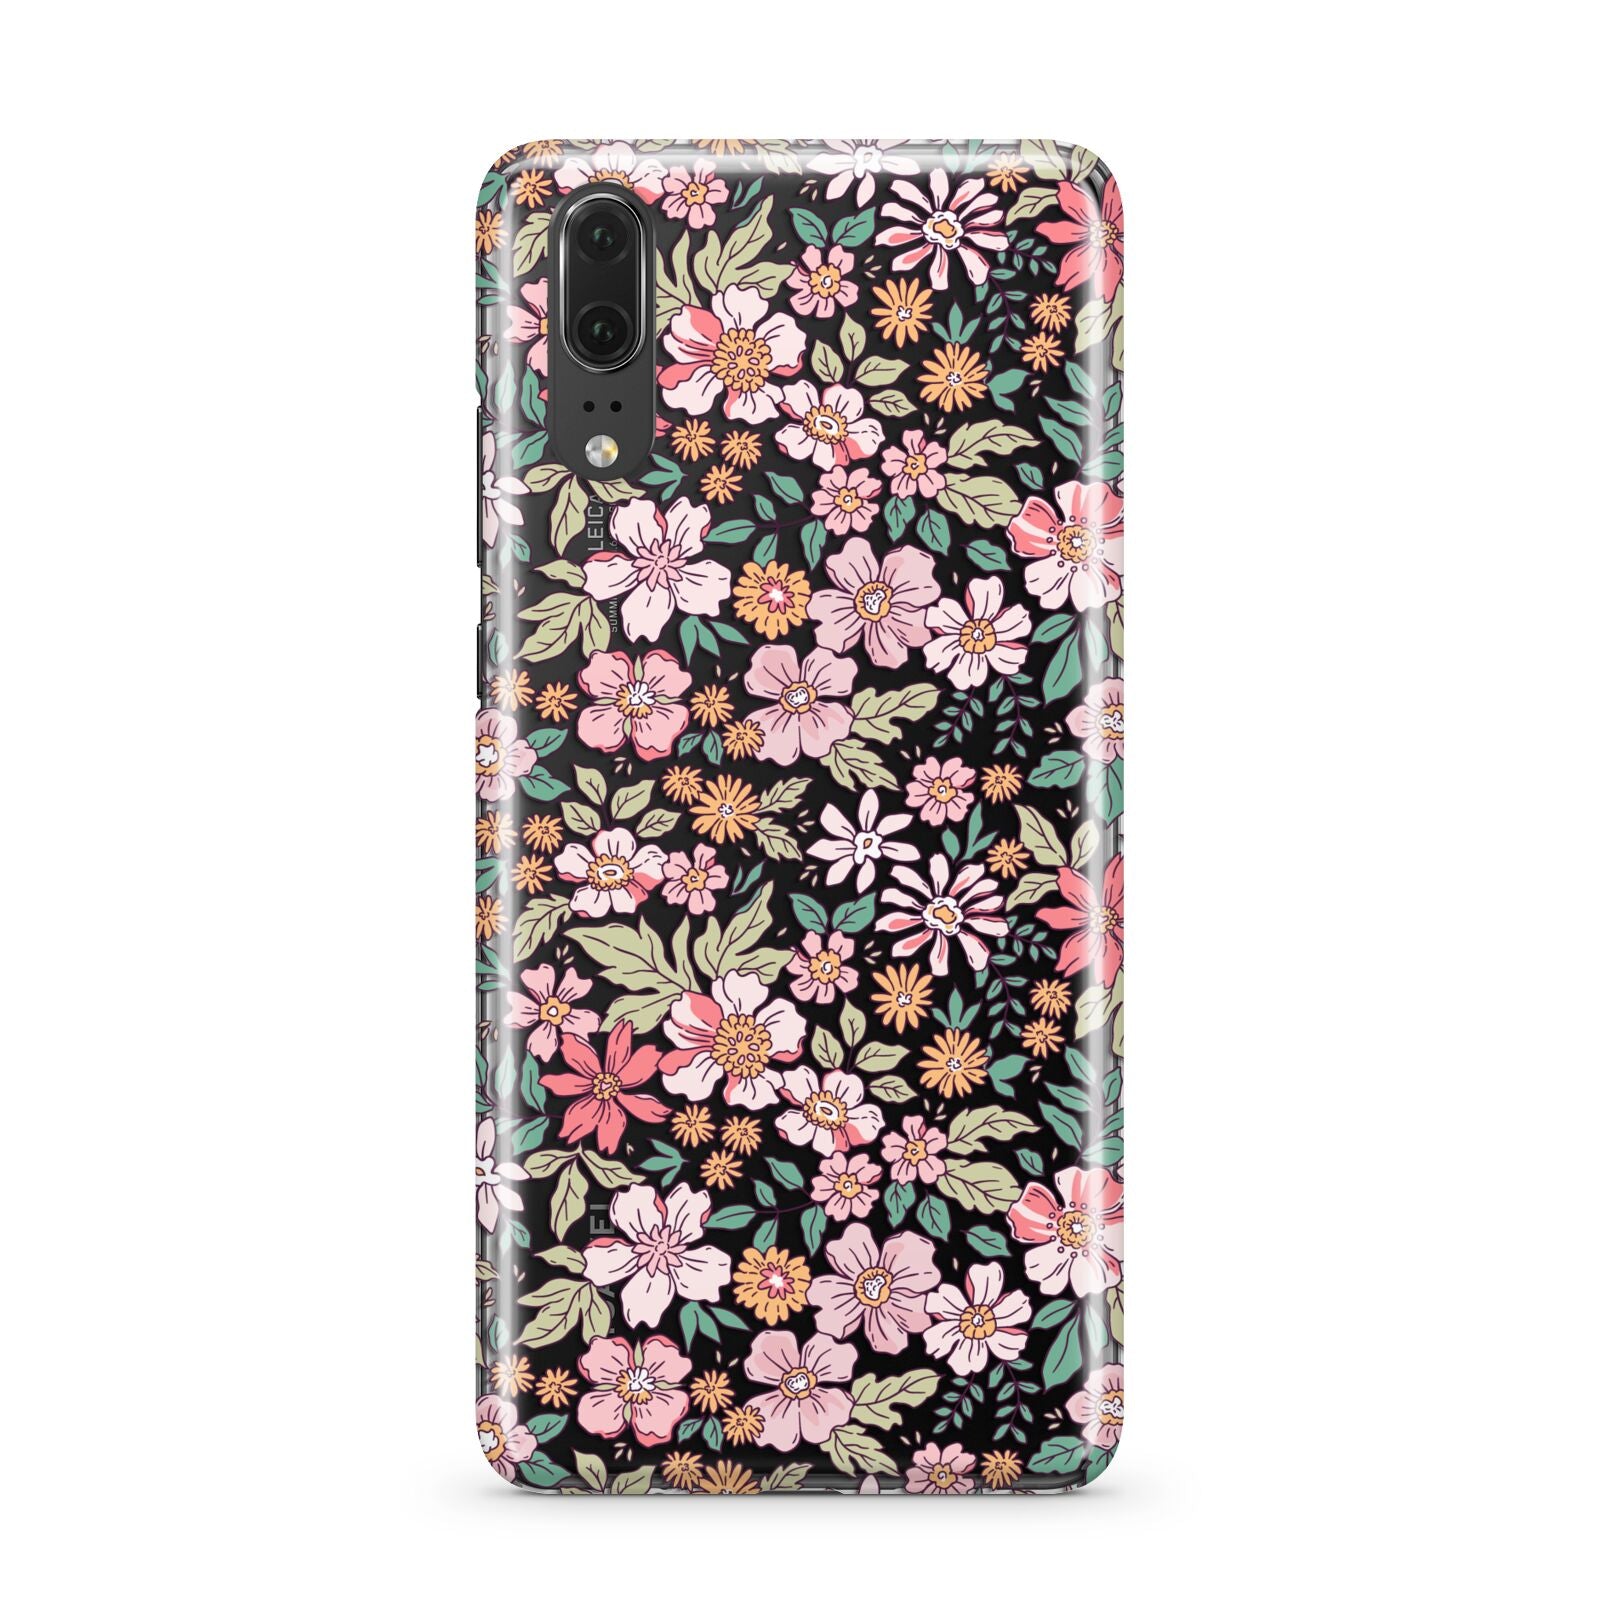 Small Floral Pattern Huawei P20 Phone Case